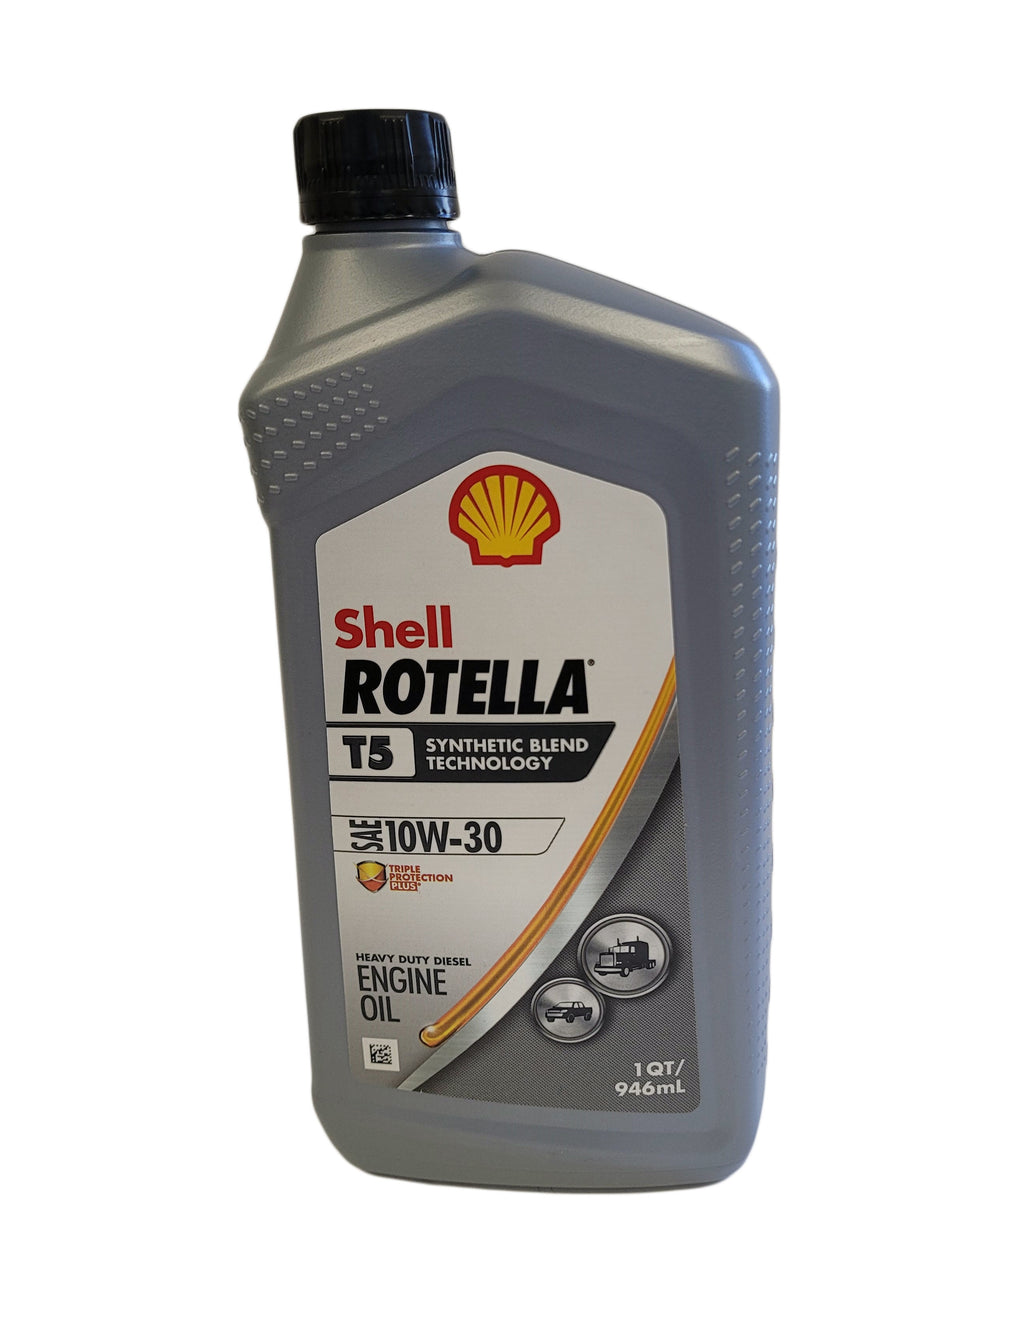 Shell Rotella T5 Diesel Engine Oil HD Synthetic Blend 10W-30